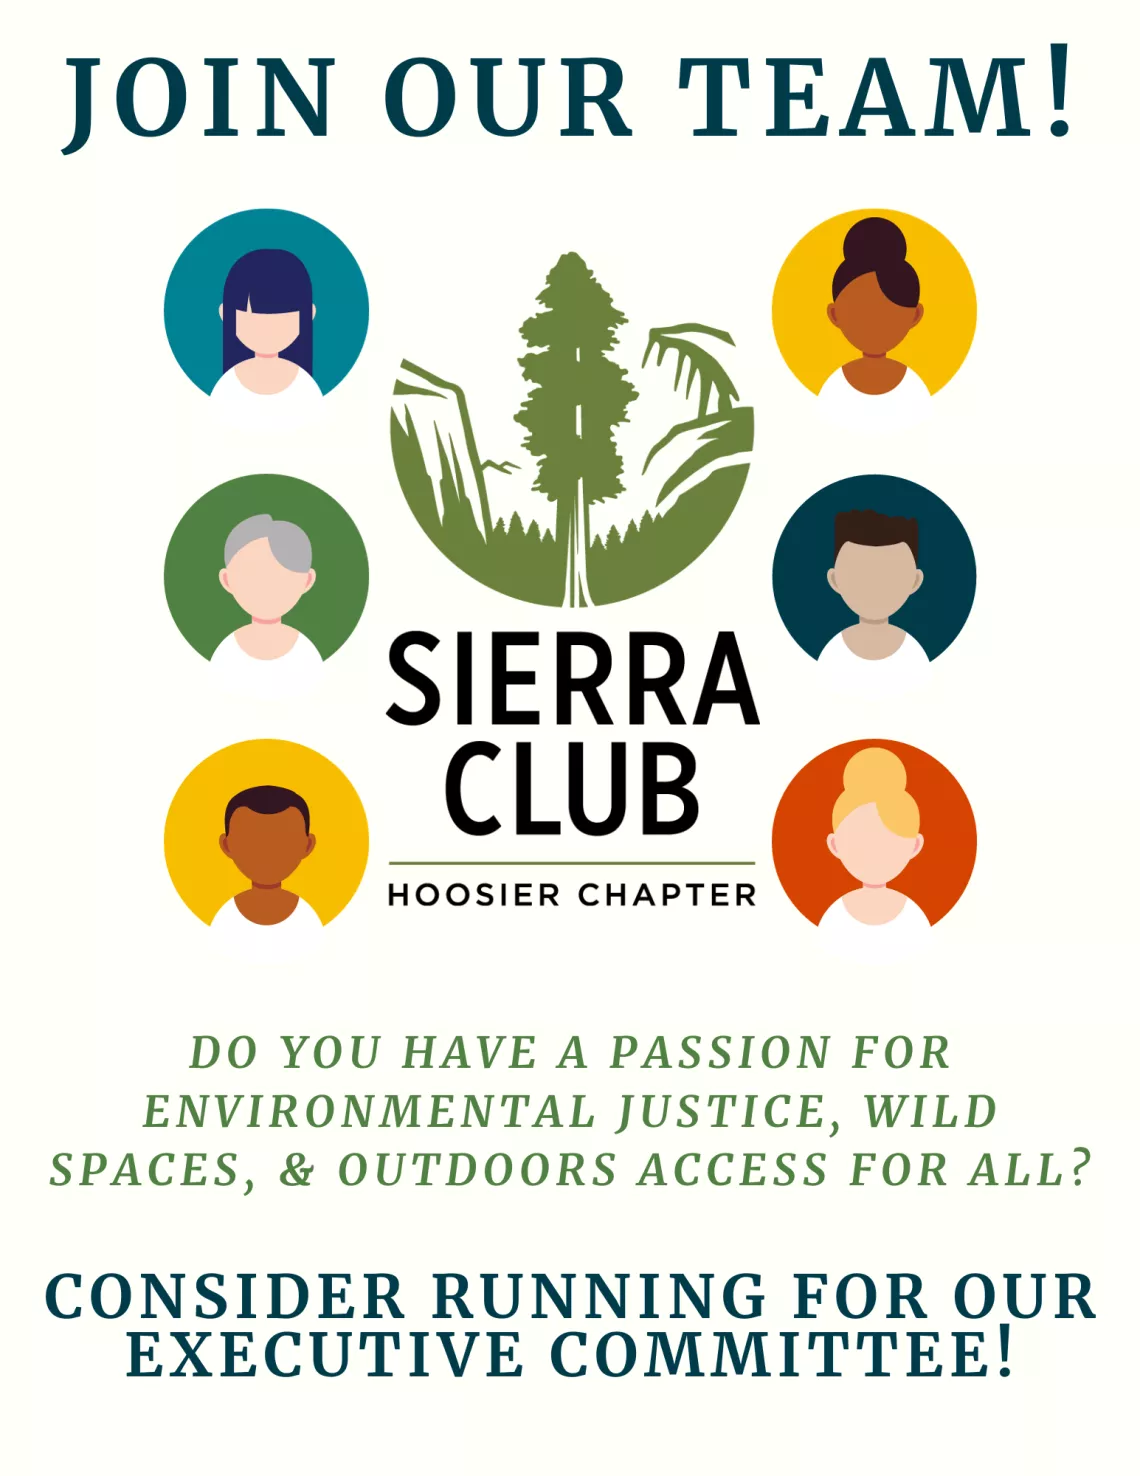 alt="An image stating Join our team! Do you have a passion for environmental justice, wild spaces, & outdoors access for all? Consider running for our executive committee!"